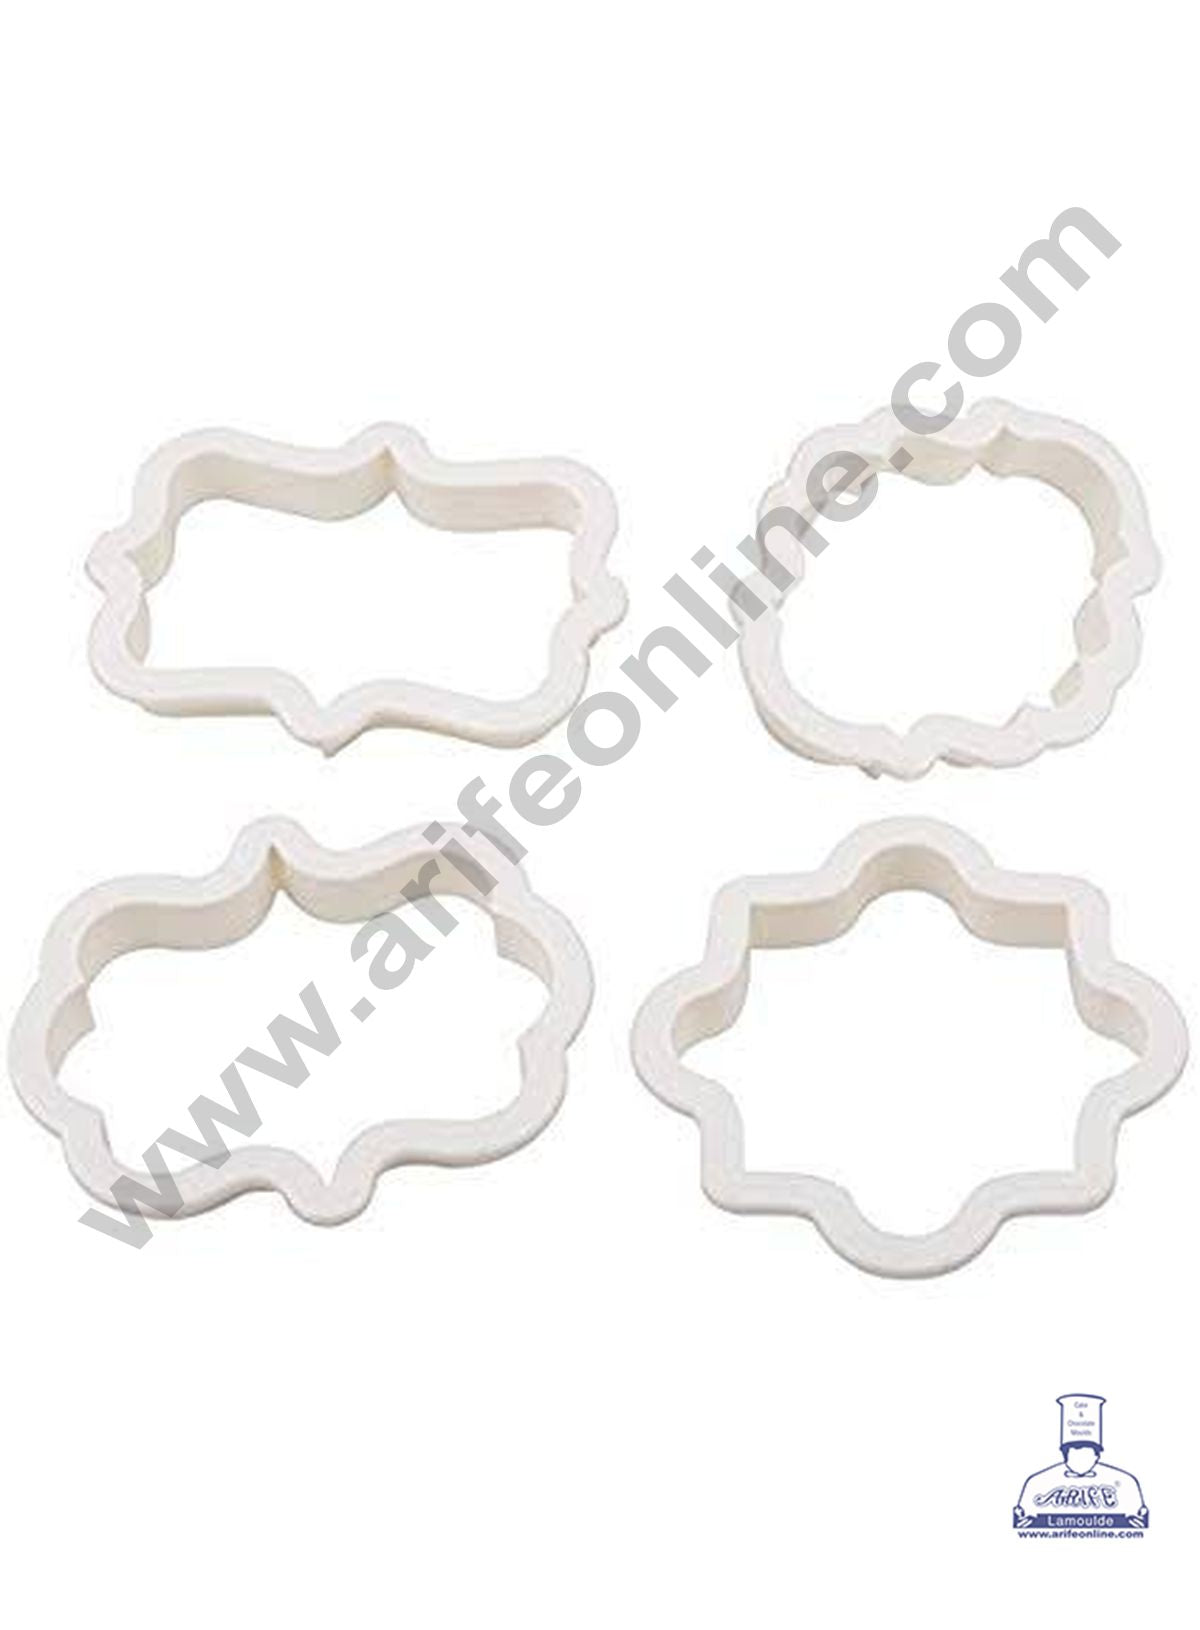 Buy Cake Decor 4pcs Vintage Plaque Frame Cookie Cutter Set Plastic Biscuit  Mould Fondant Cake Decorating Tools Online at Low Prices in India -  Amazon.in